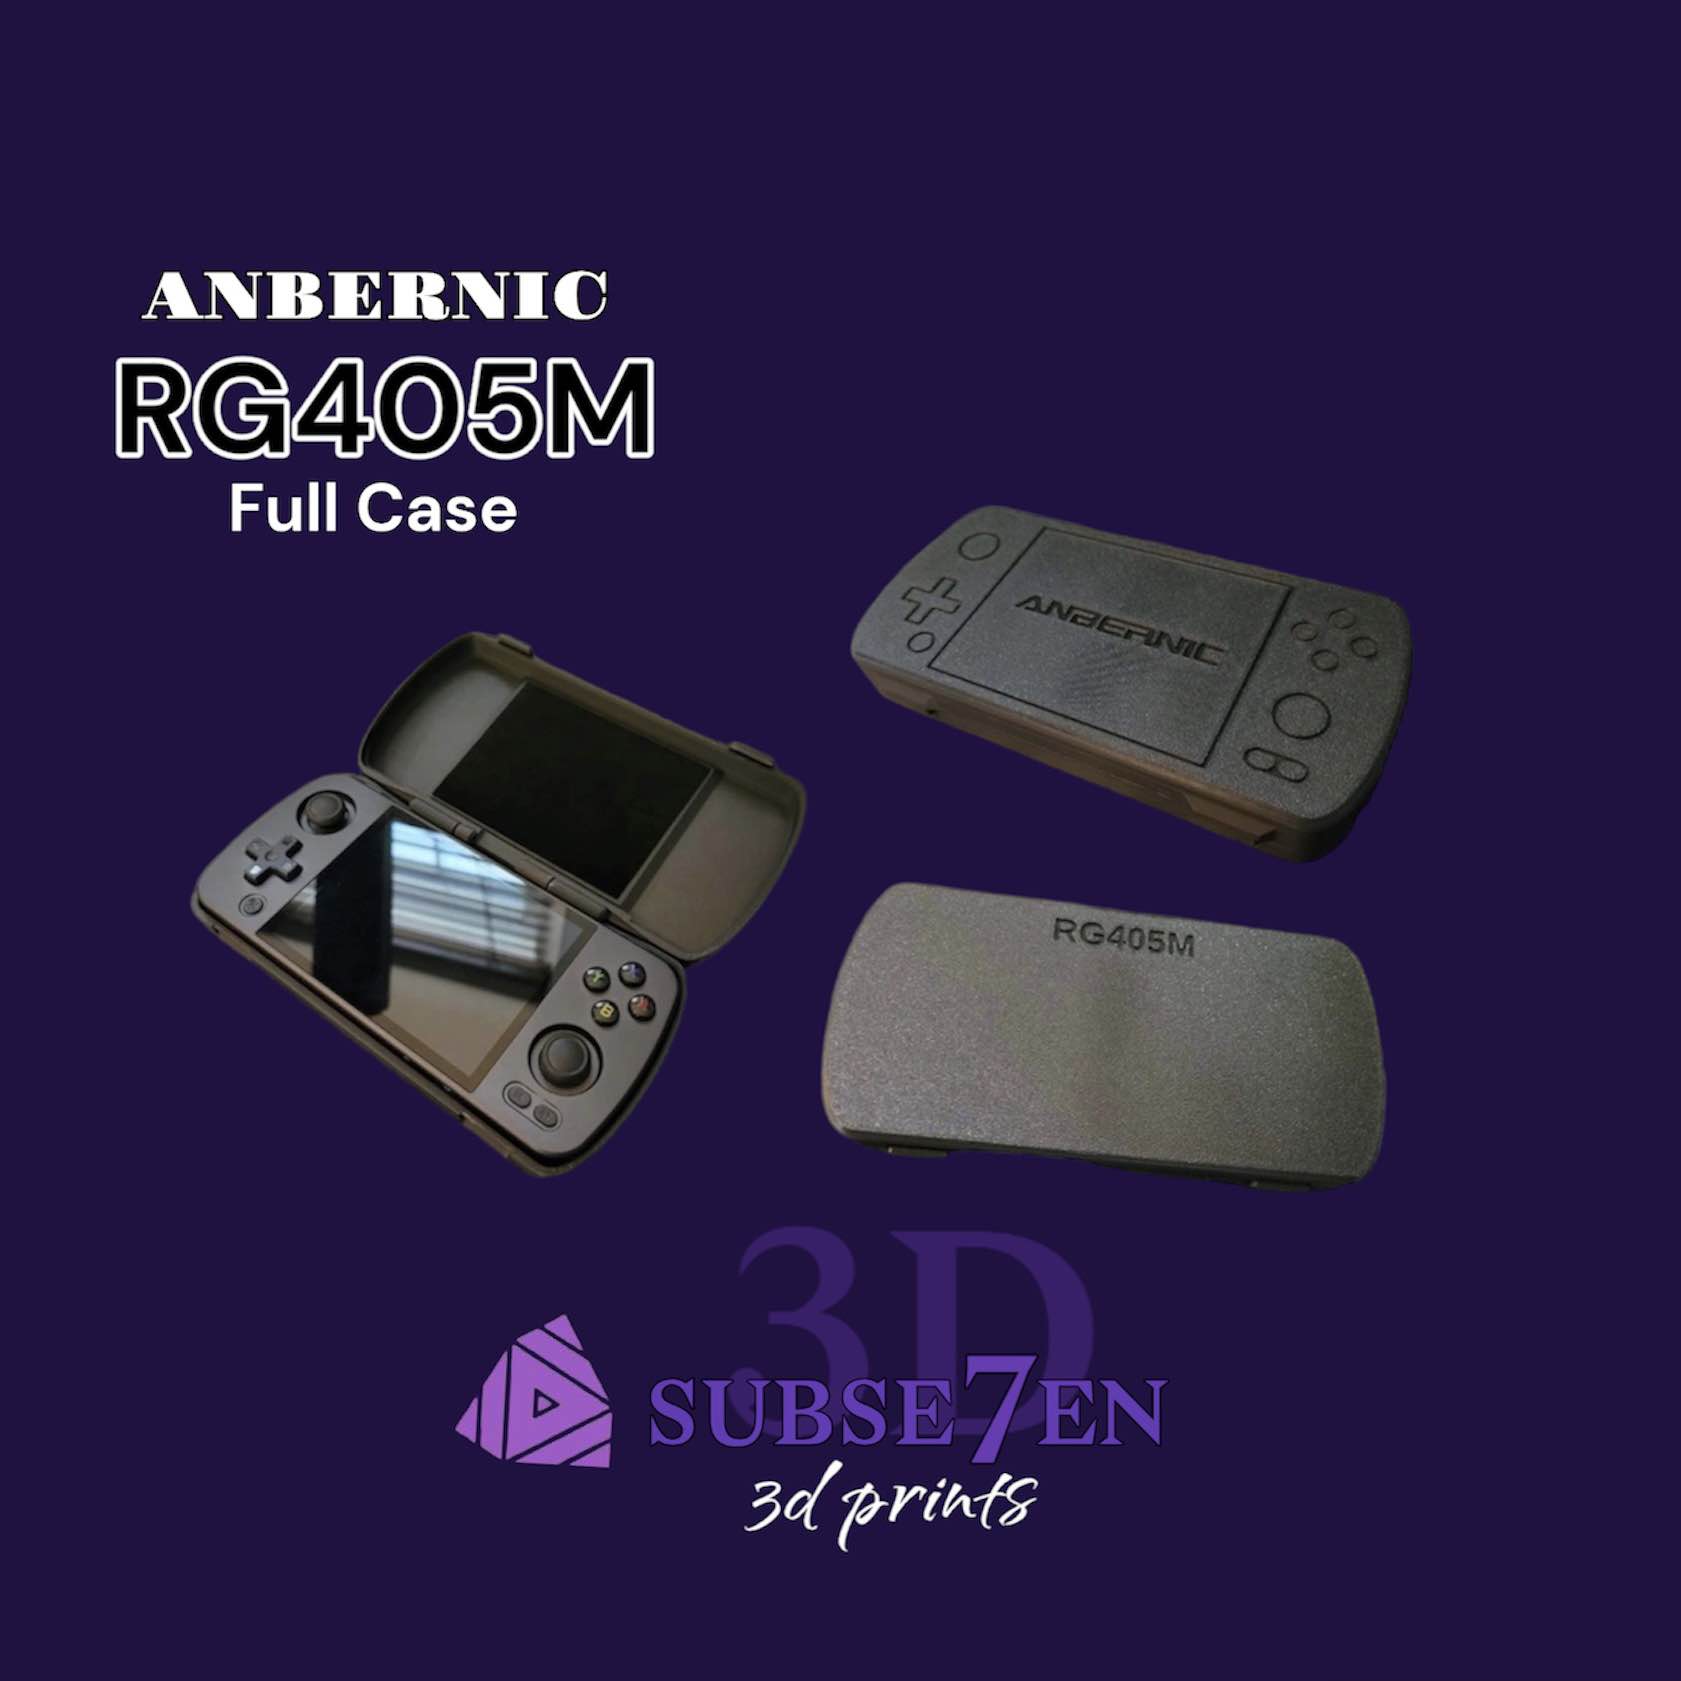 Anbernic RG405M Portable Grip Case Reversible Screen Protector 3D Printed 